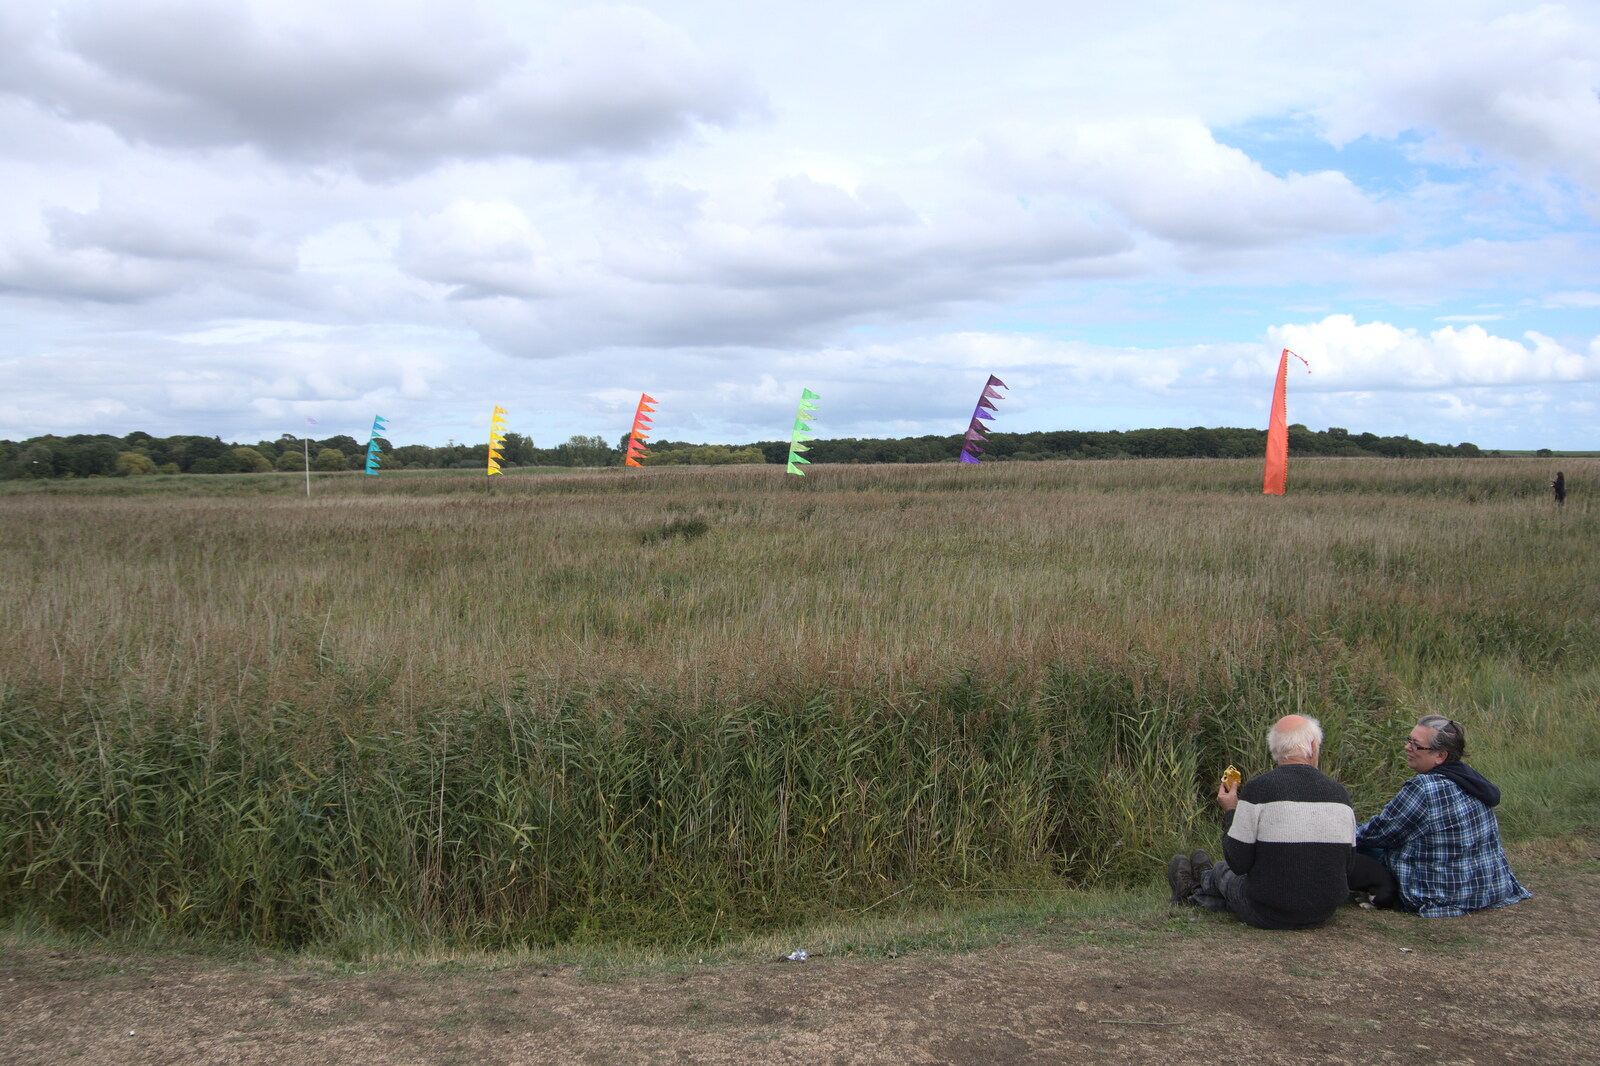 Flags out in the marshes from The Aldeburgh Food Festival, Snape Maltings, Suffolk - 25th September 2022